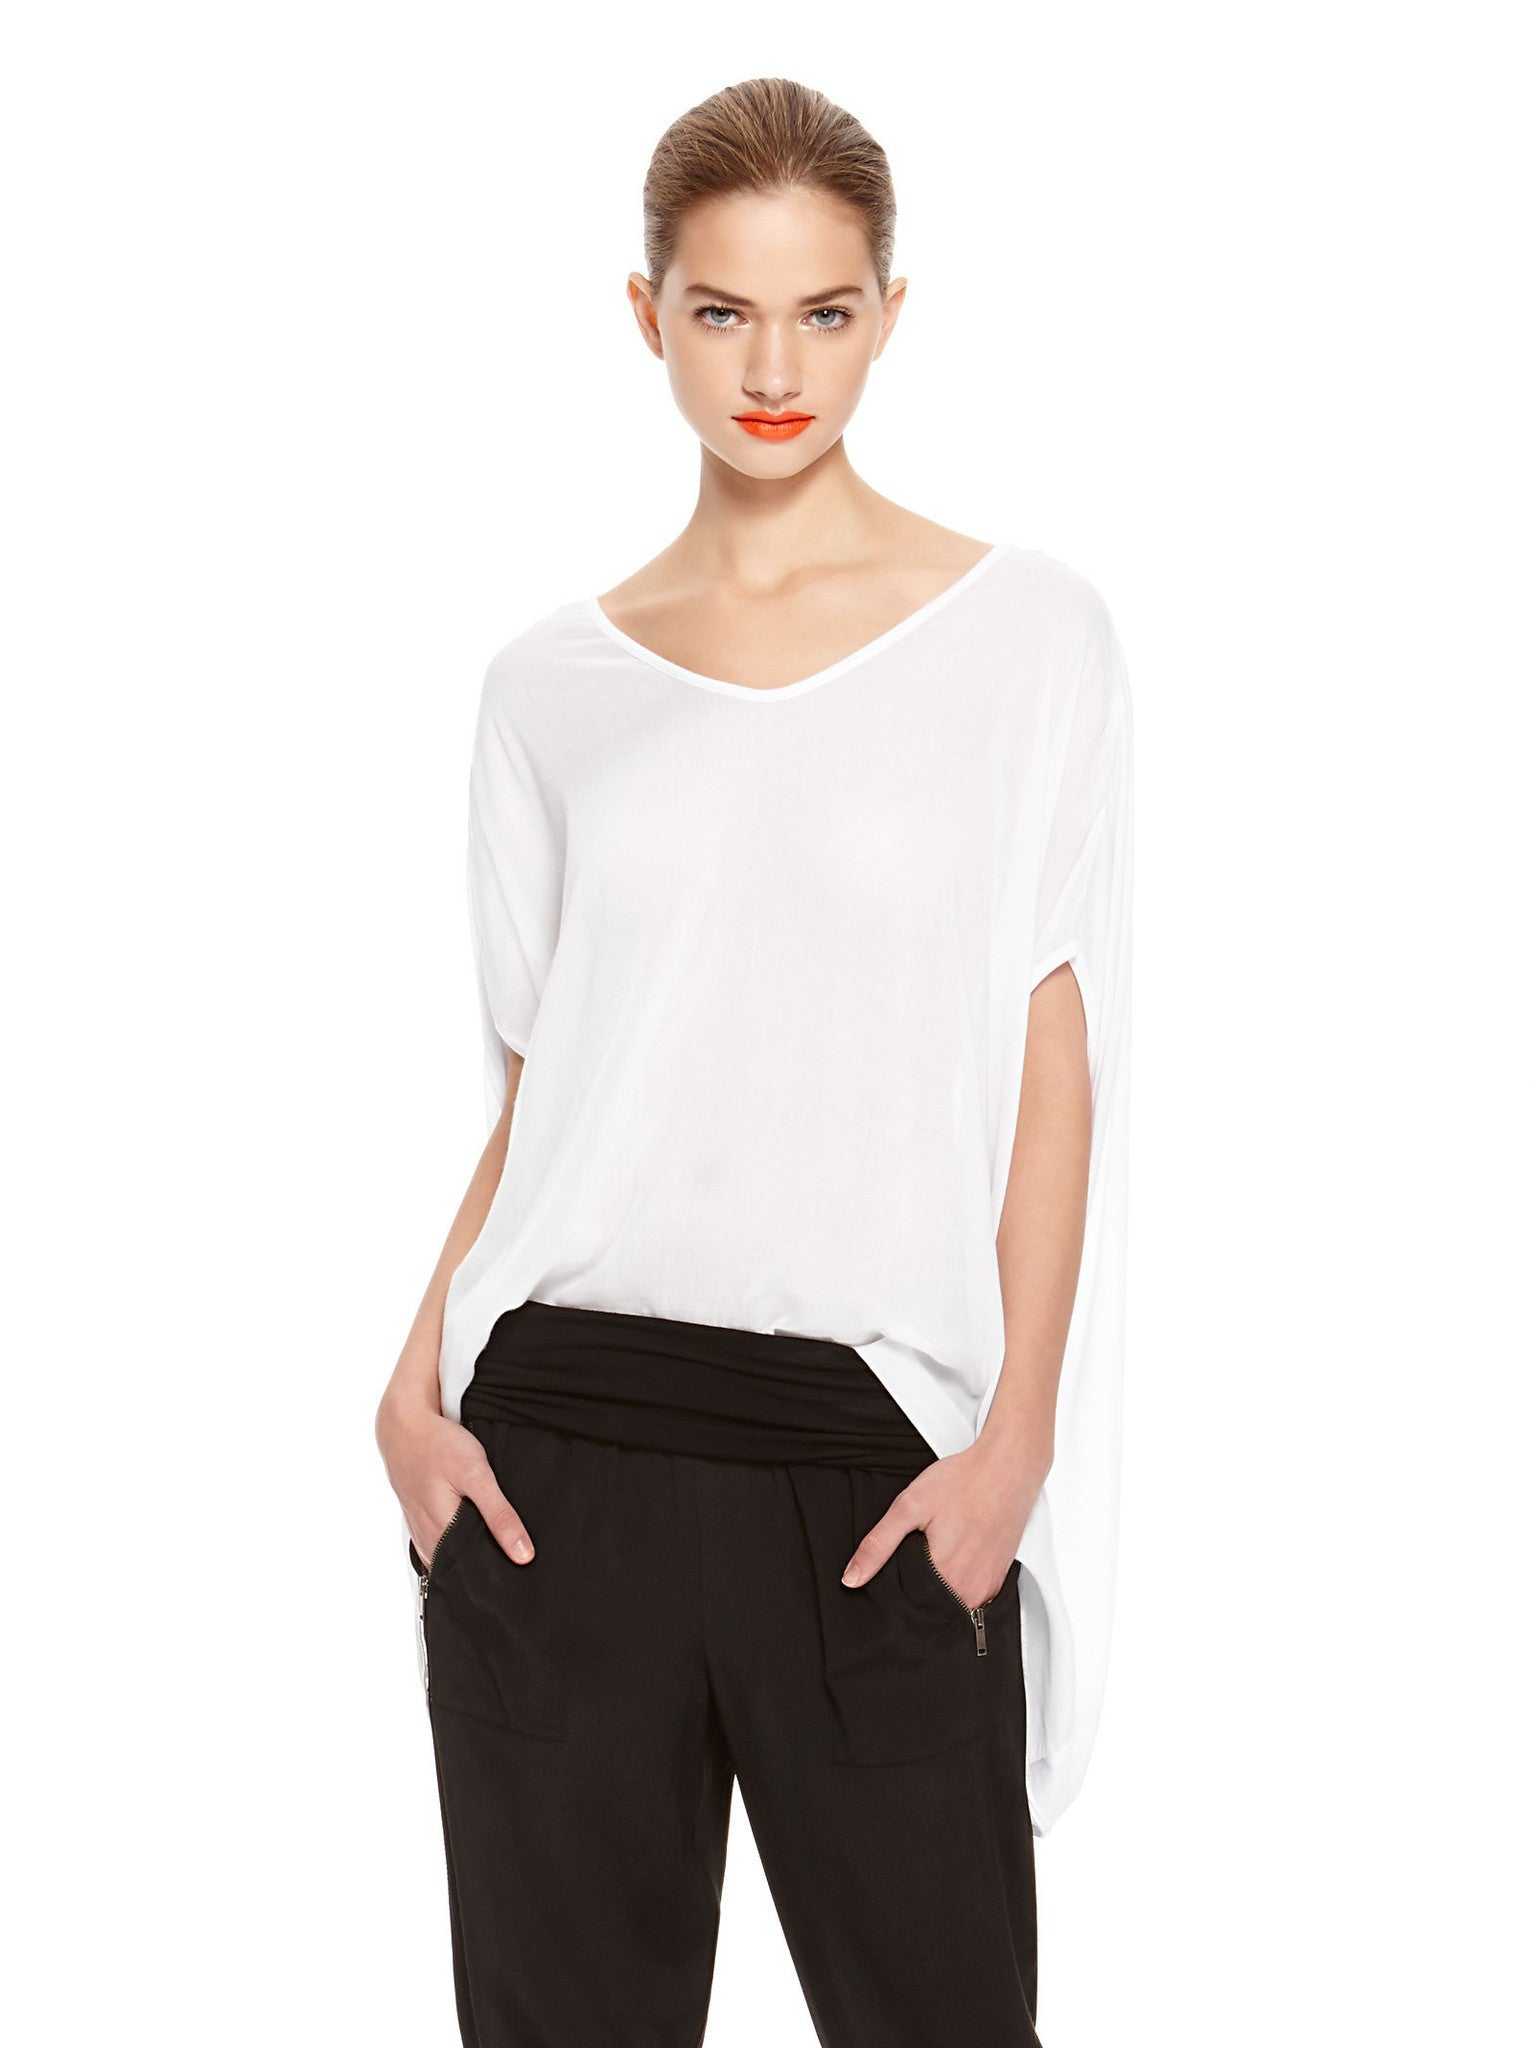 dknypure-poncho-top